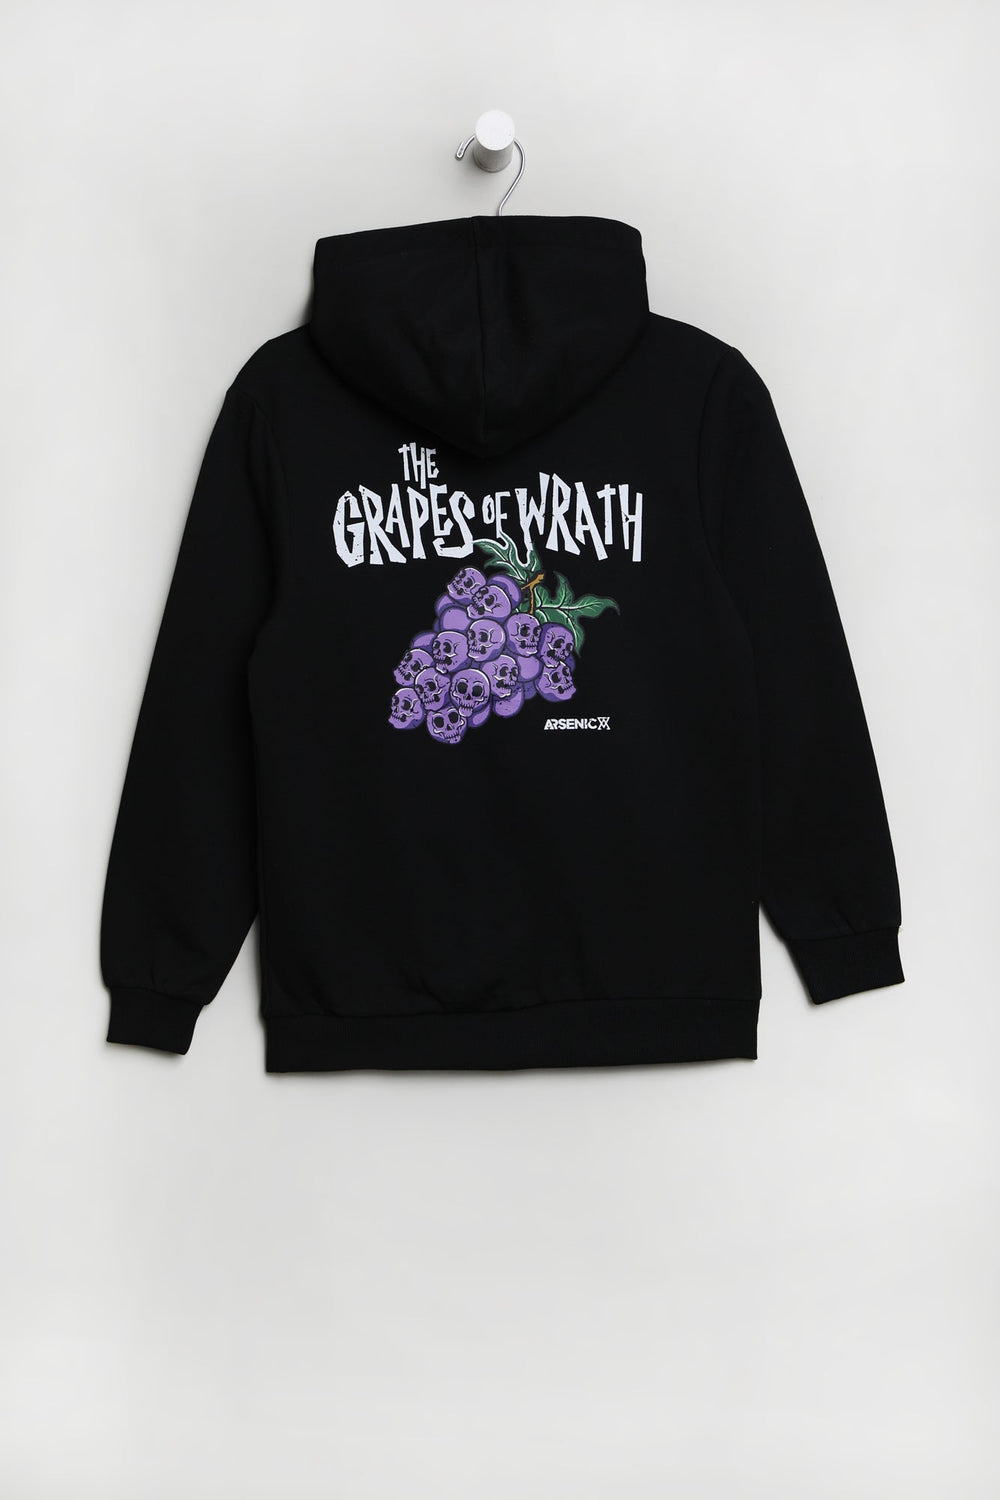 Arsenic Youth Grapes of Wrath Hoodie Arsenic Youth Grapes of Wrath Hoodie